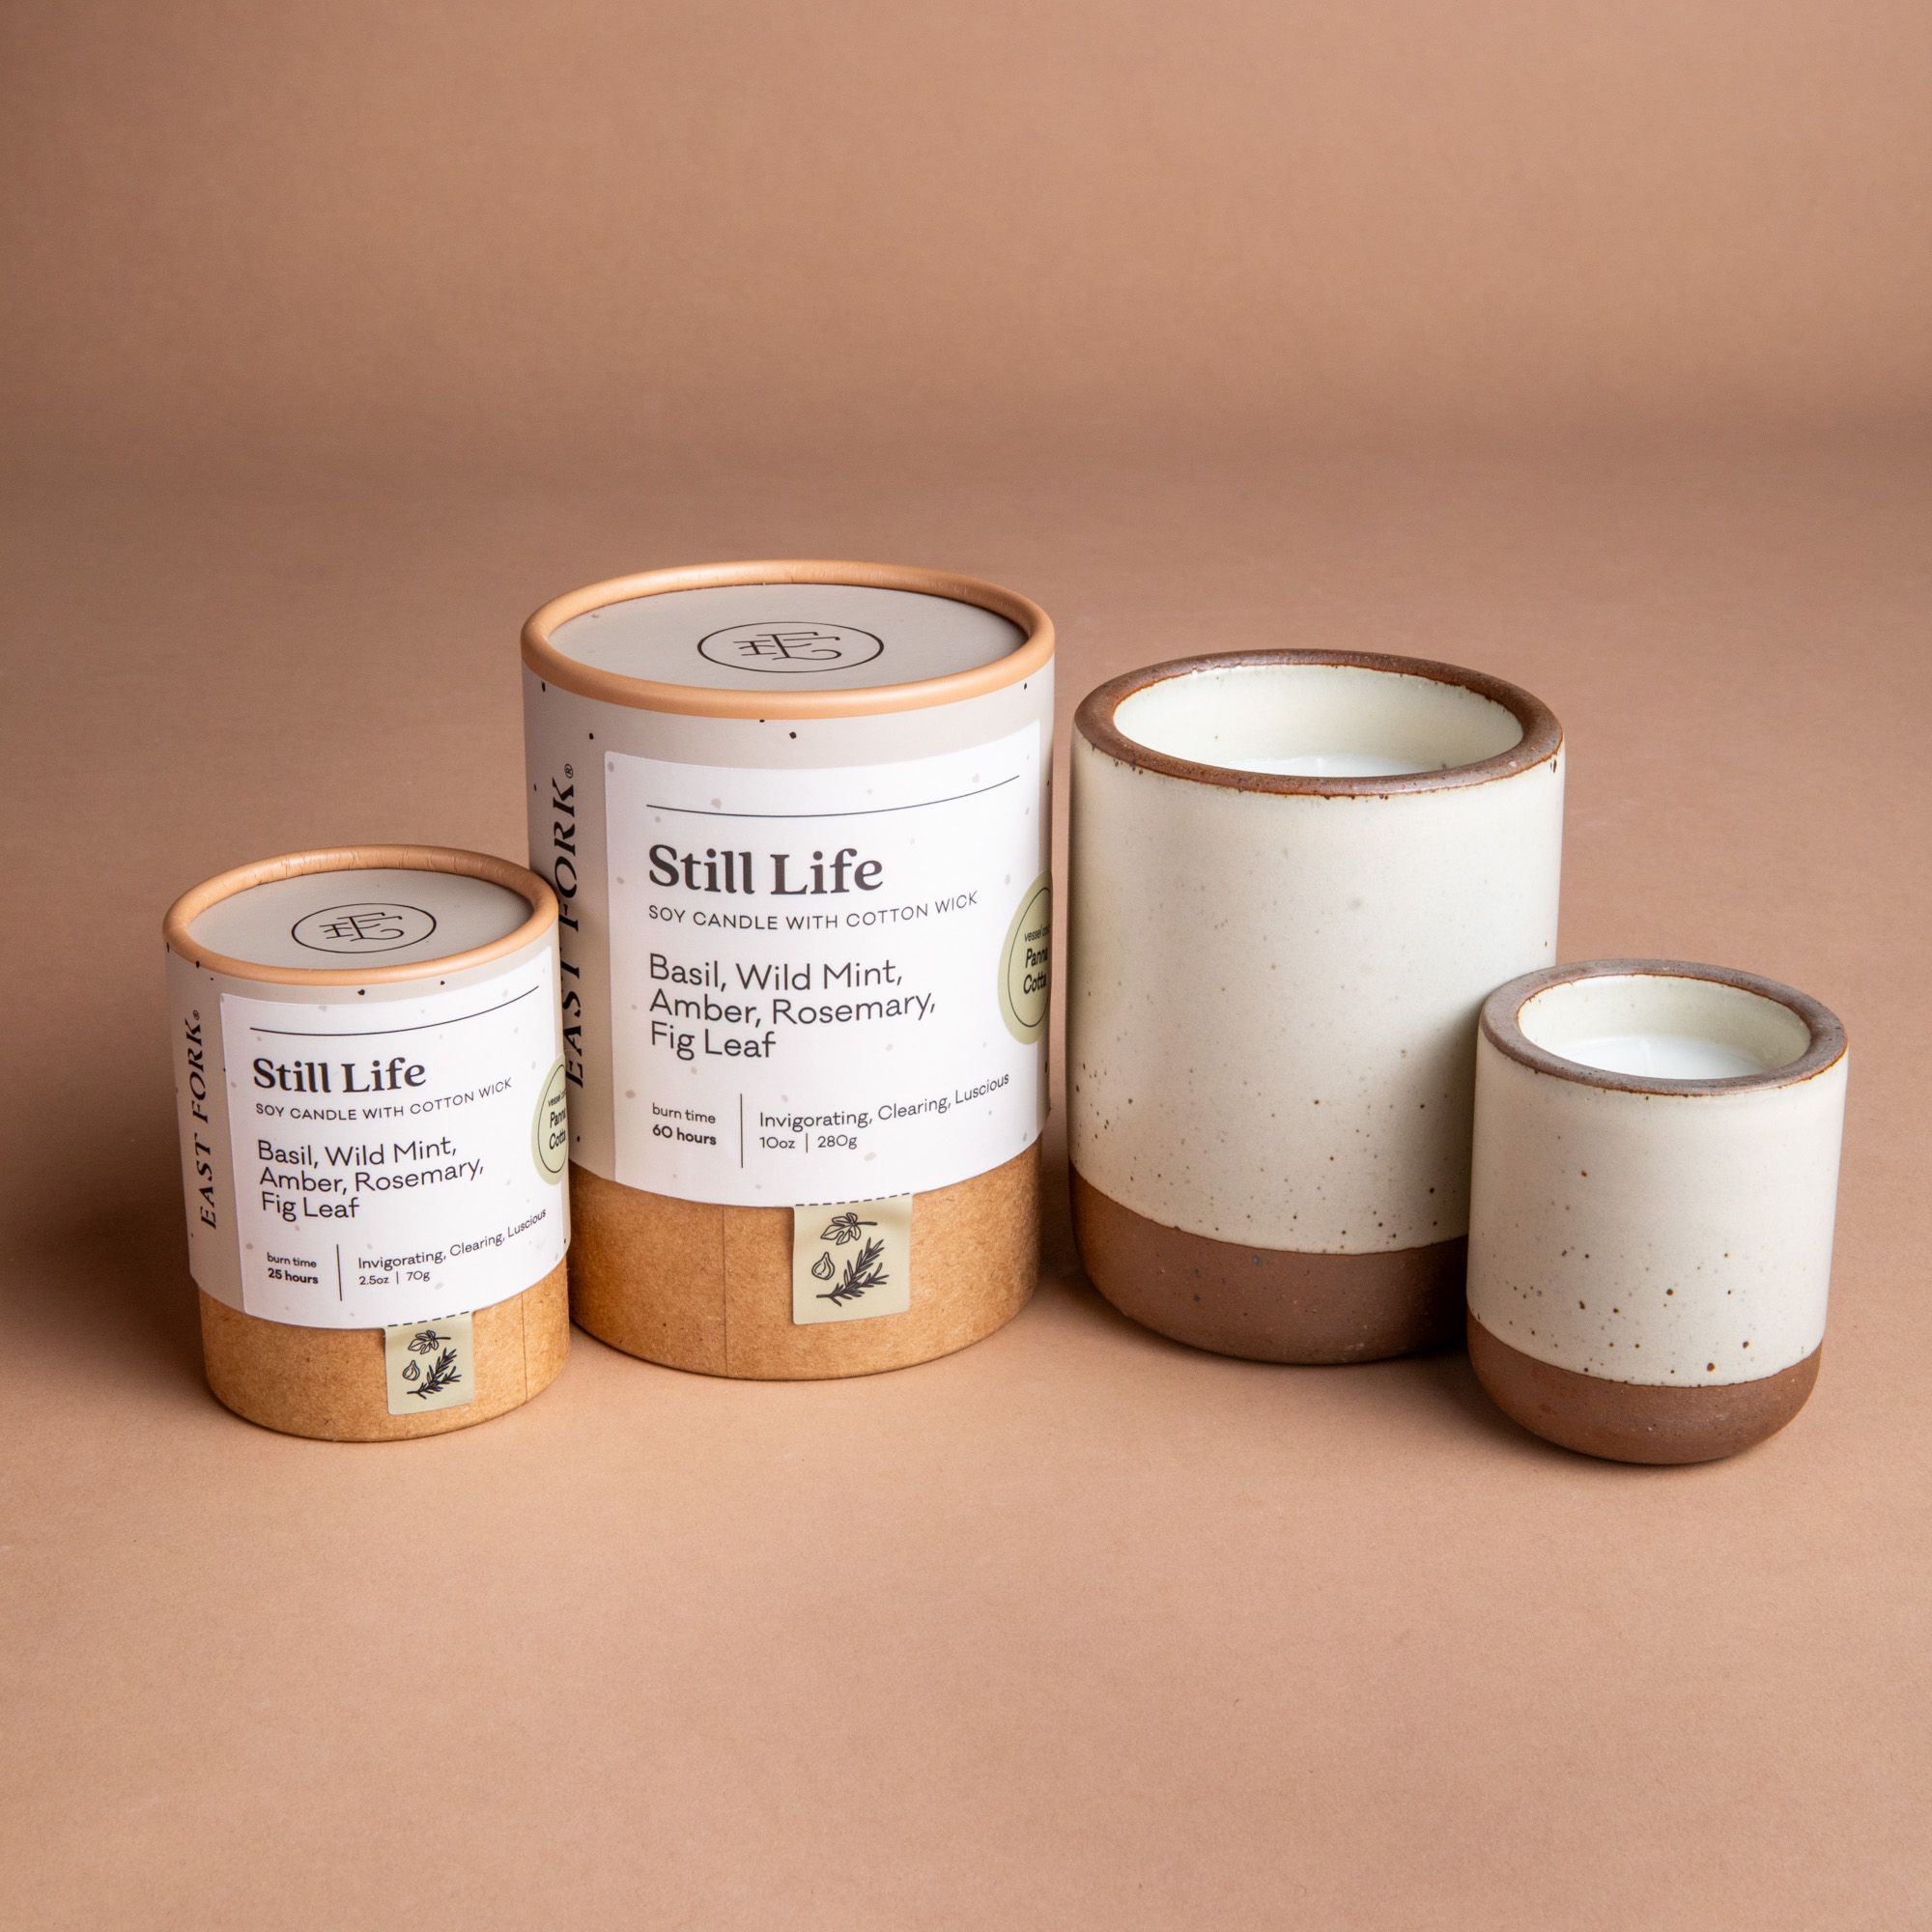 Small and large ceramic vessel next to each other in a warm off-white color with candles inside each. Cardboard tube packaging is on the left with branding stickers that say "Still Life".